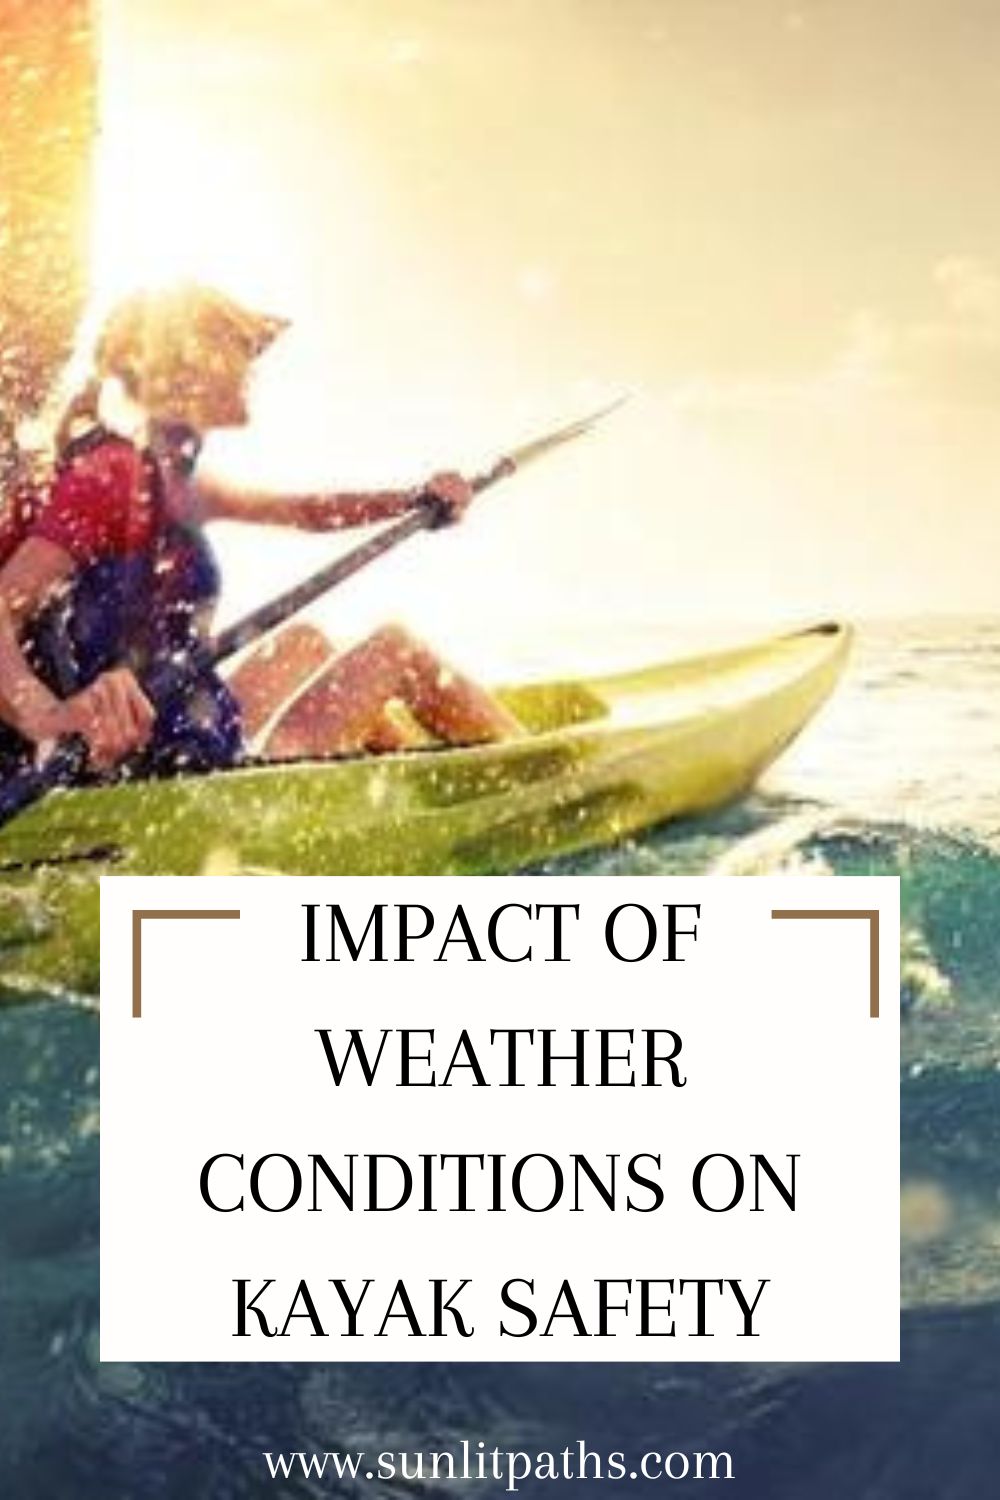 Impact of Weather Conditions on Kayak Safety